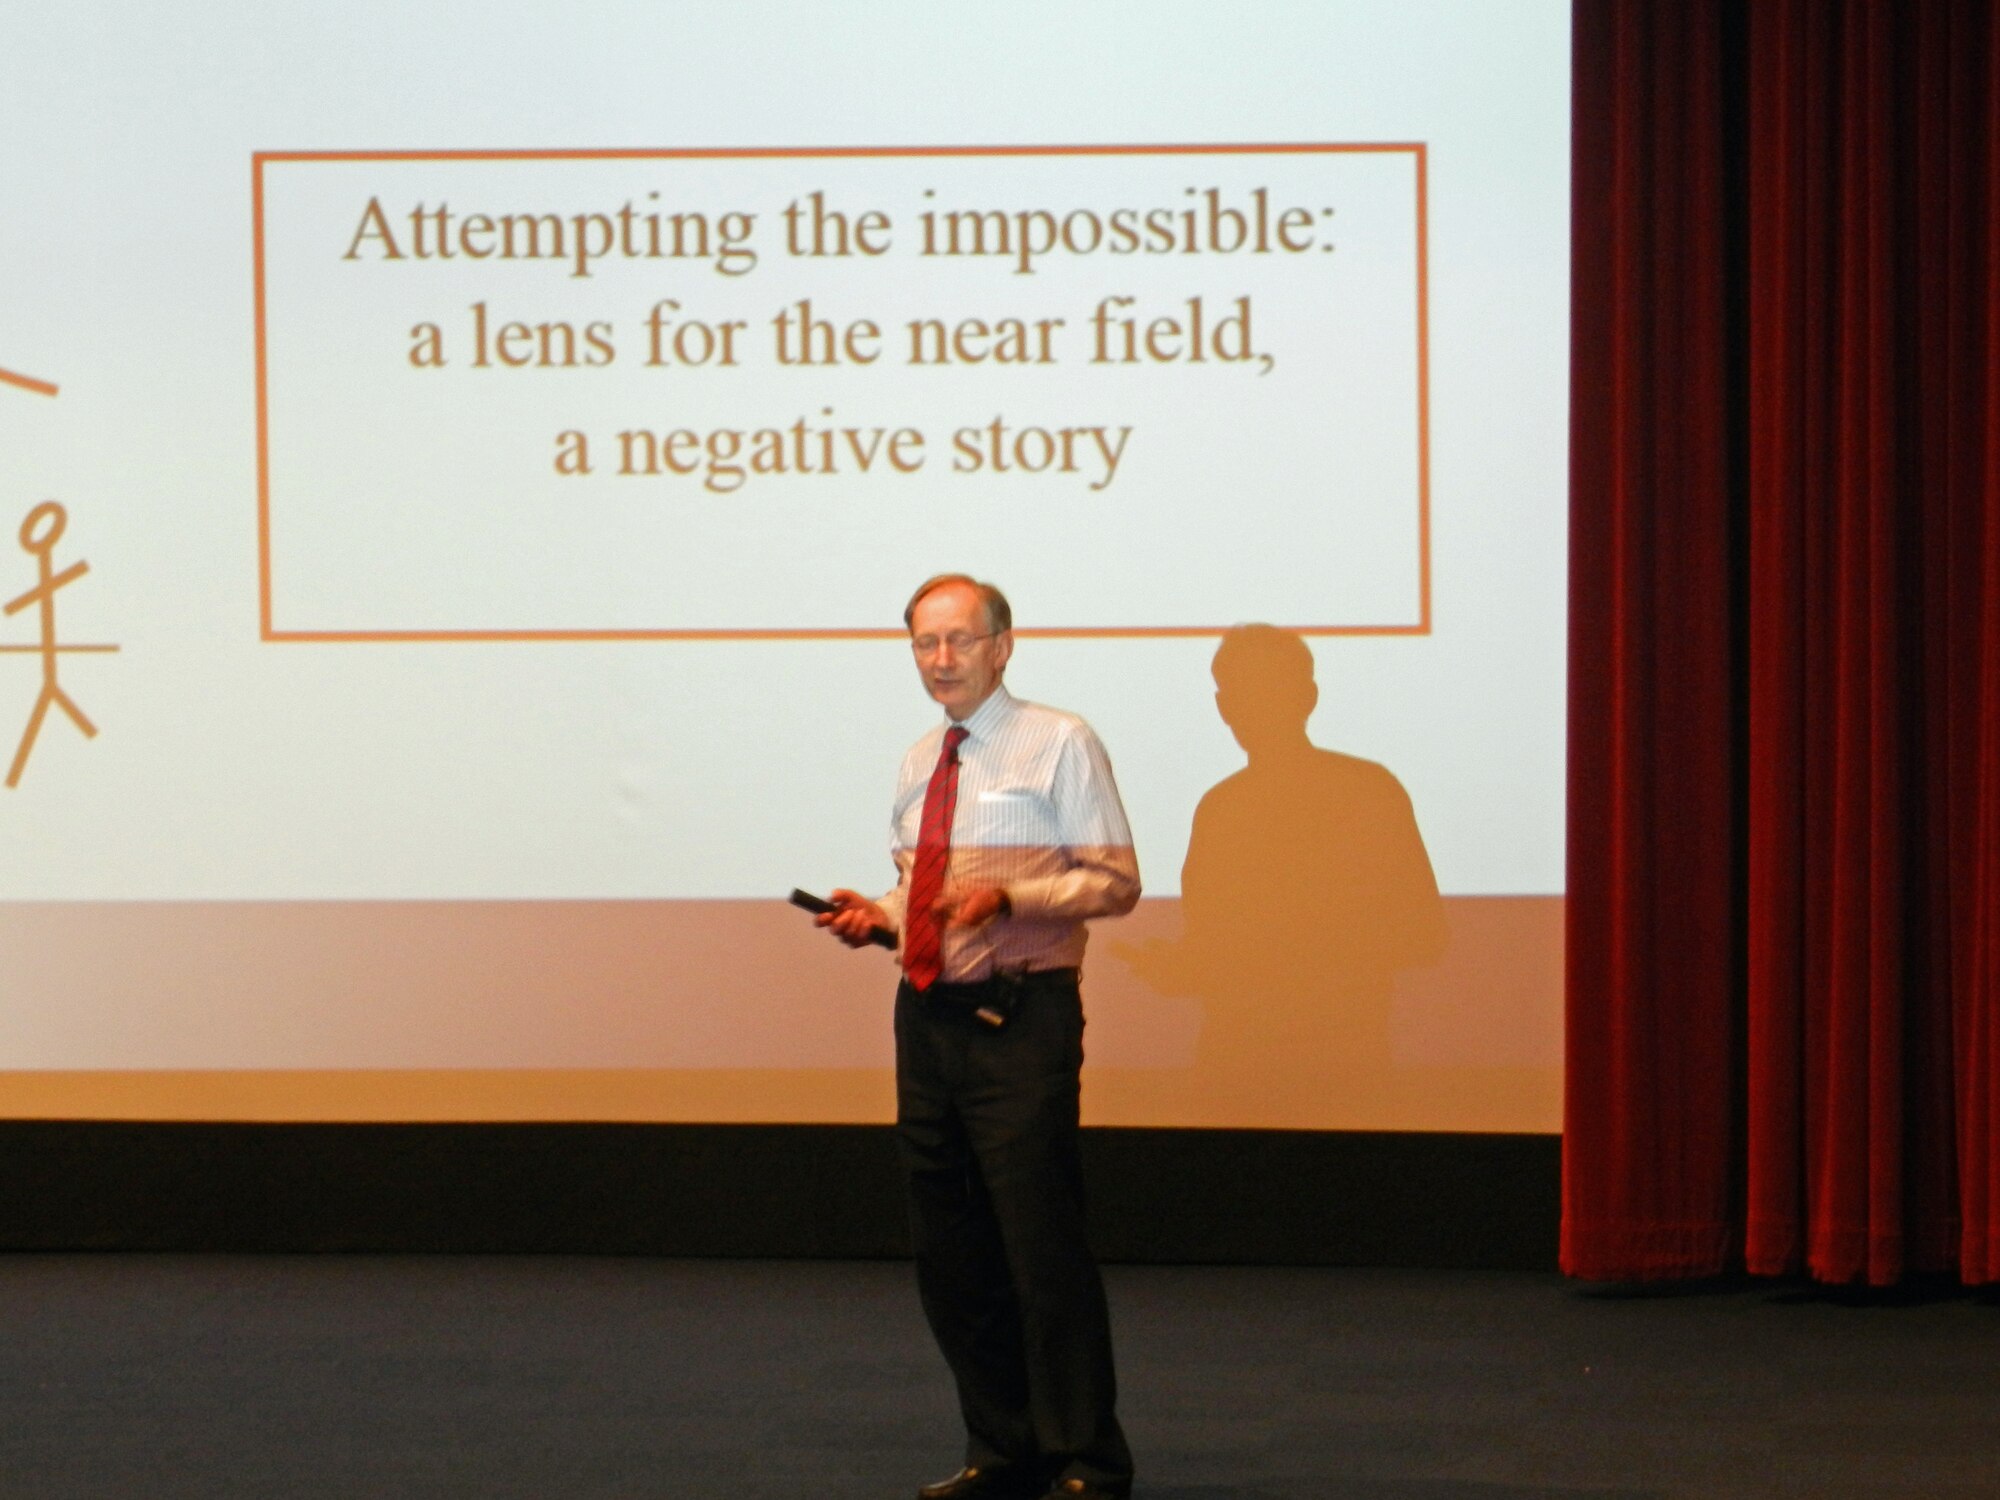 AFOSR-funded researcher, Sir John Pendry spoke to a crowd of over 200 at the Air Force Institute of Technology’s (AFIT) Kenney Hall Auditorium Monday as part of AFIT’s regular speaker series and in celebration of the 60th anniversary of the Air Force Office of Scientific Research.  